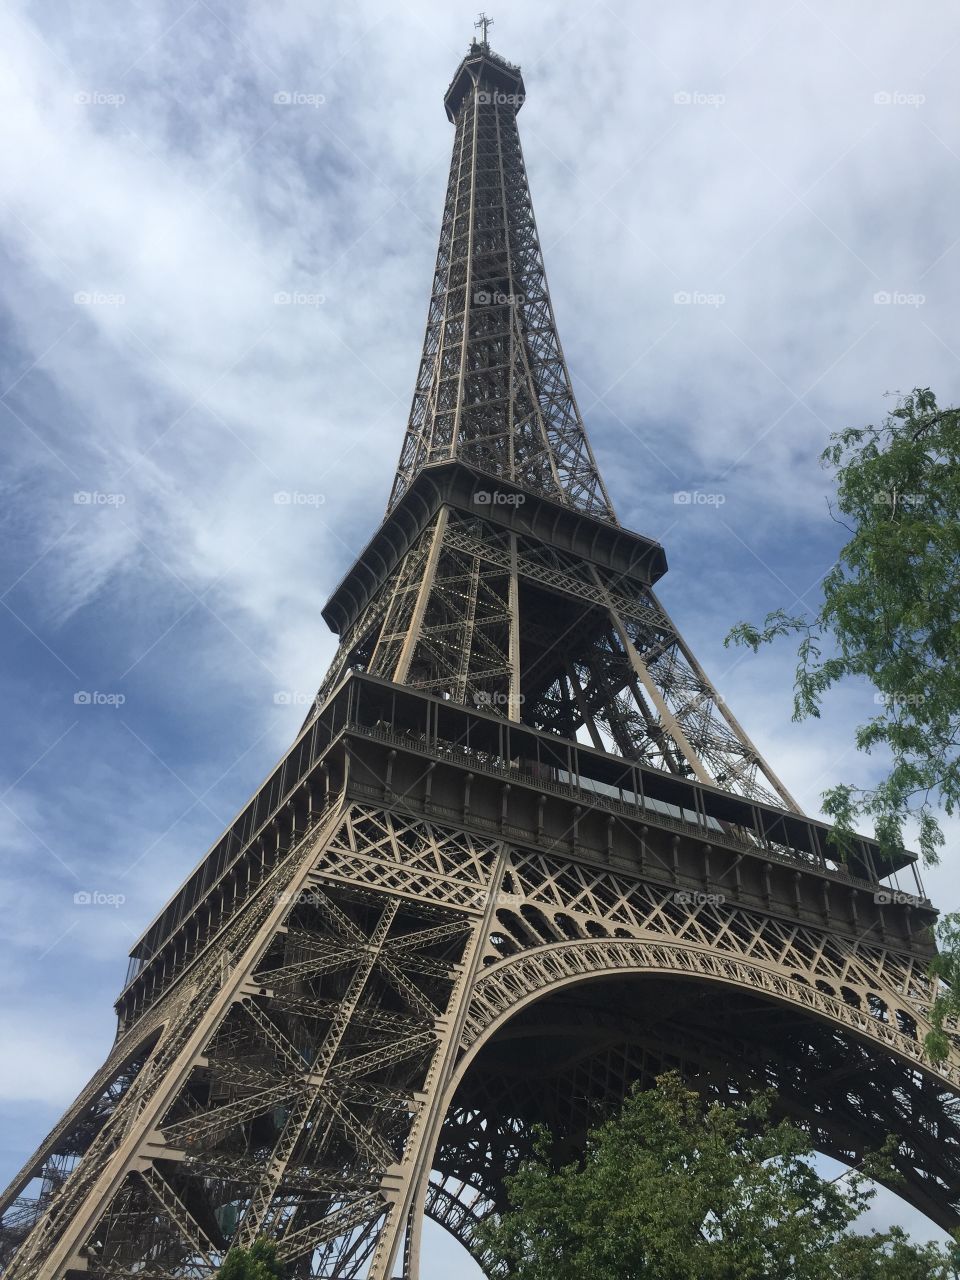 The Eiffel Tower from below, Paris, France 